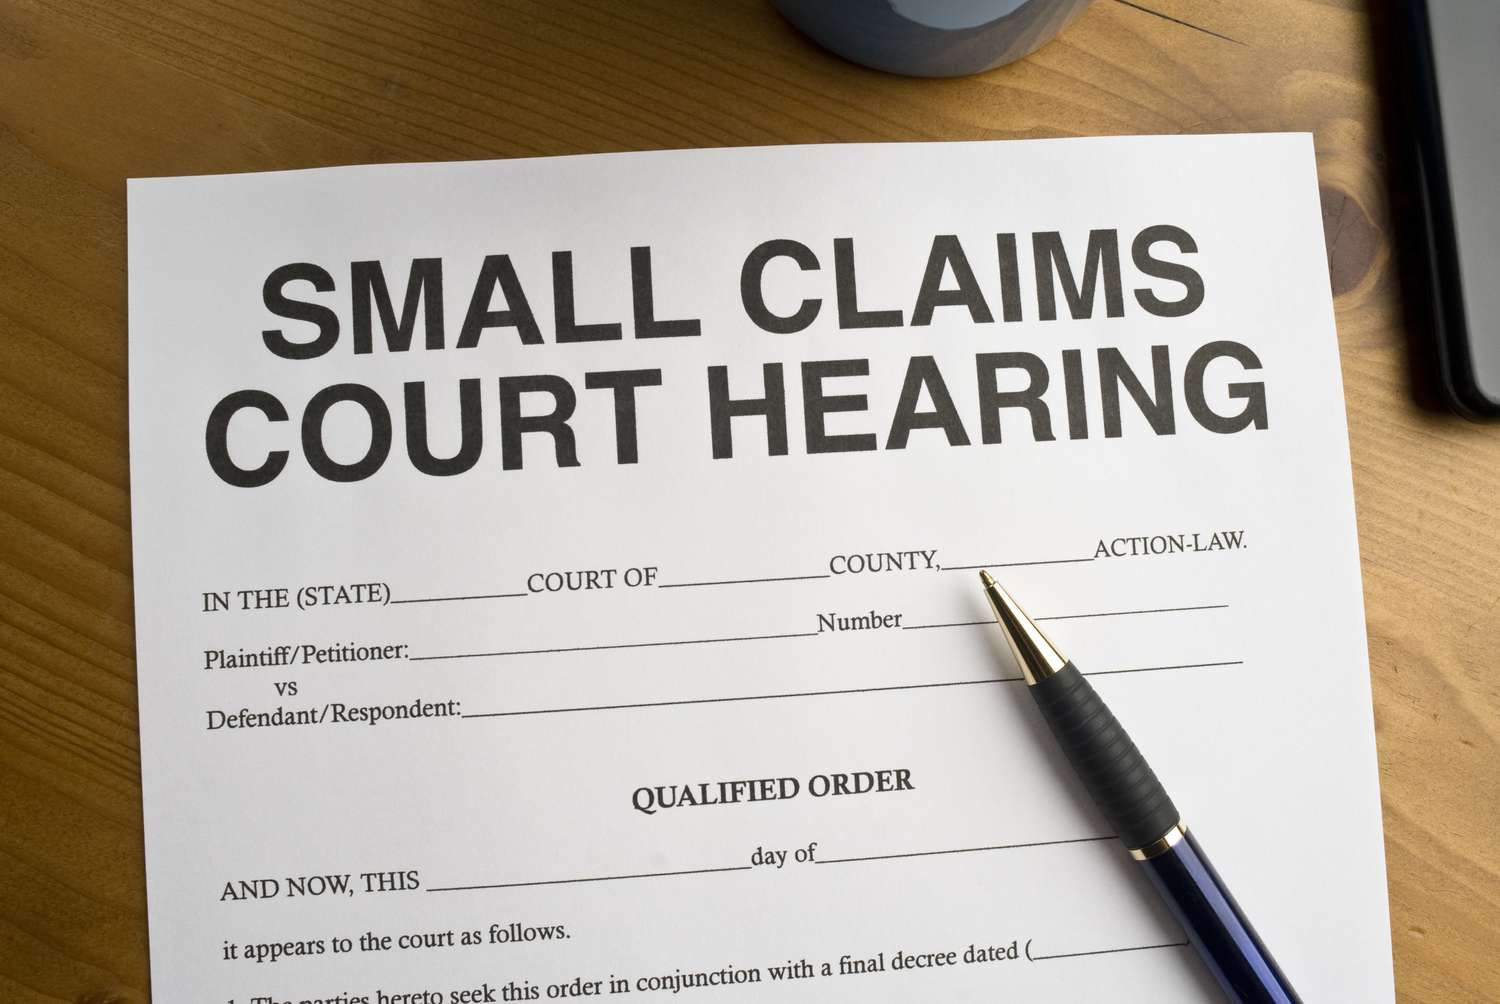 How To Reschedule Your Small Claims Court Hearing And Avoid Paying Opponent’s Fees